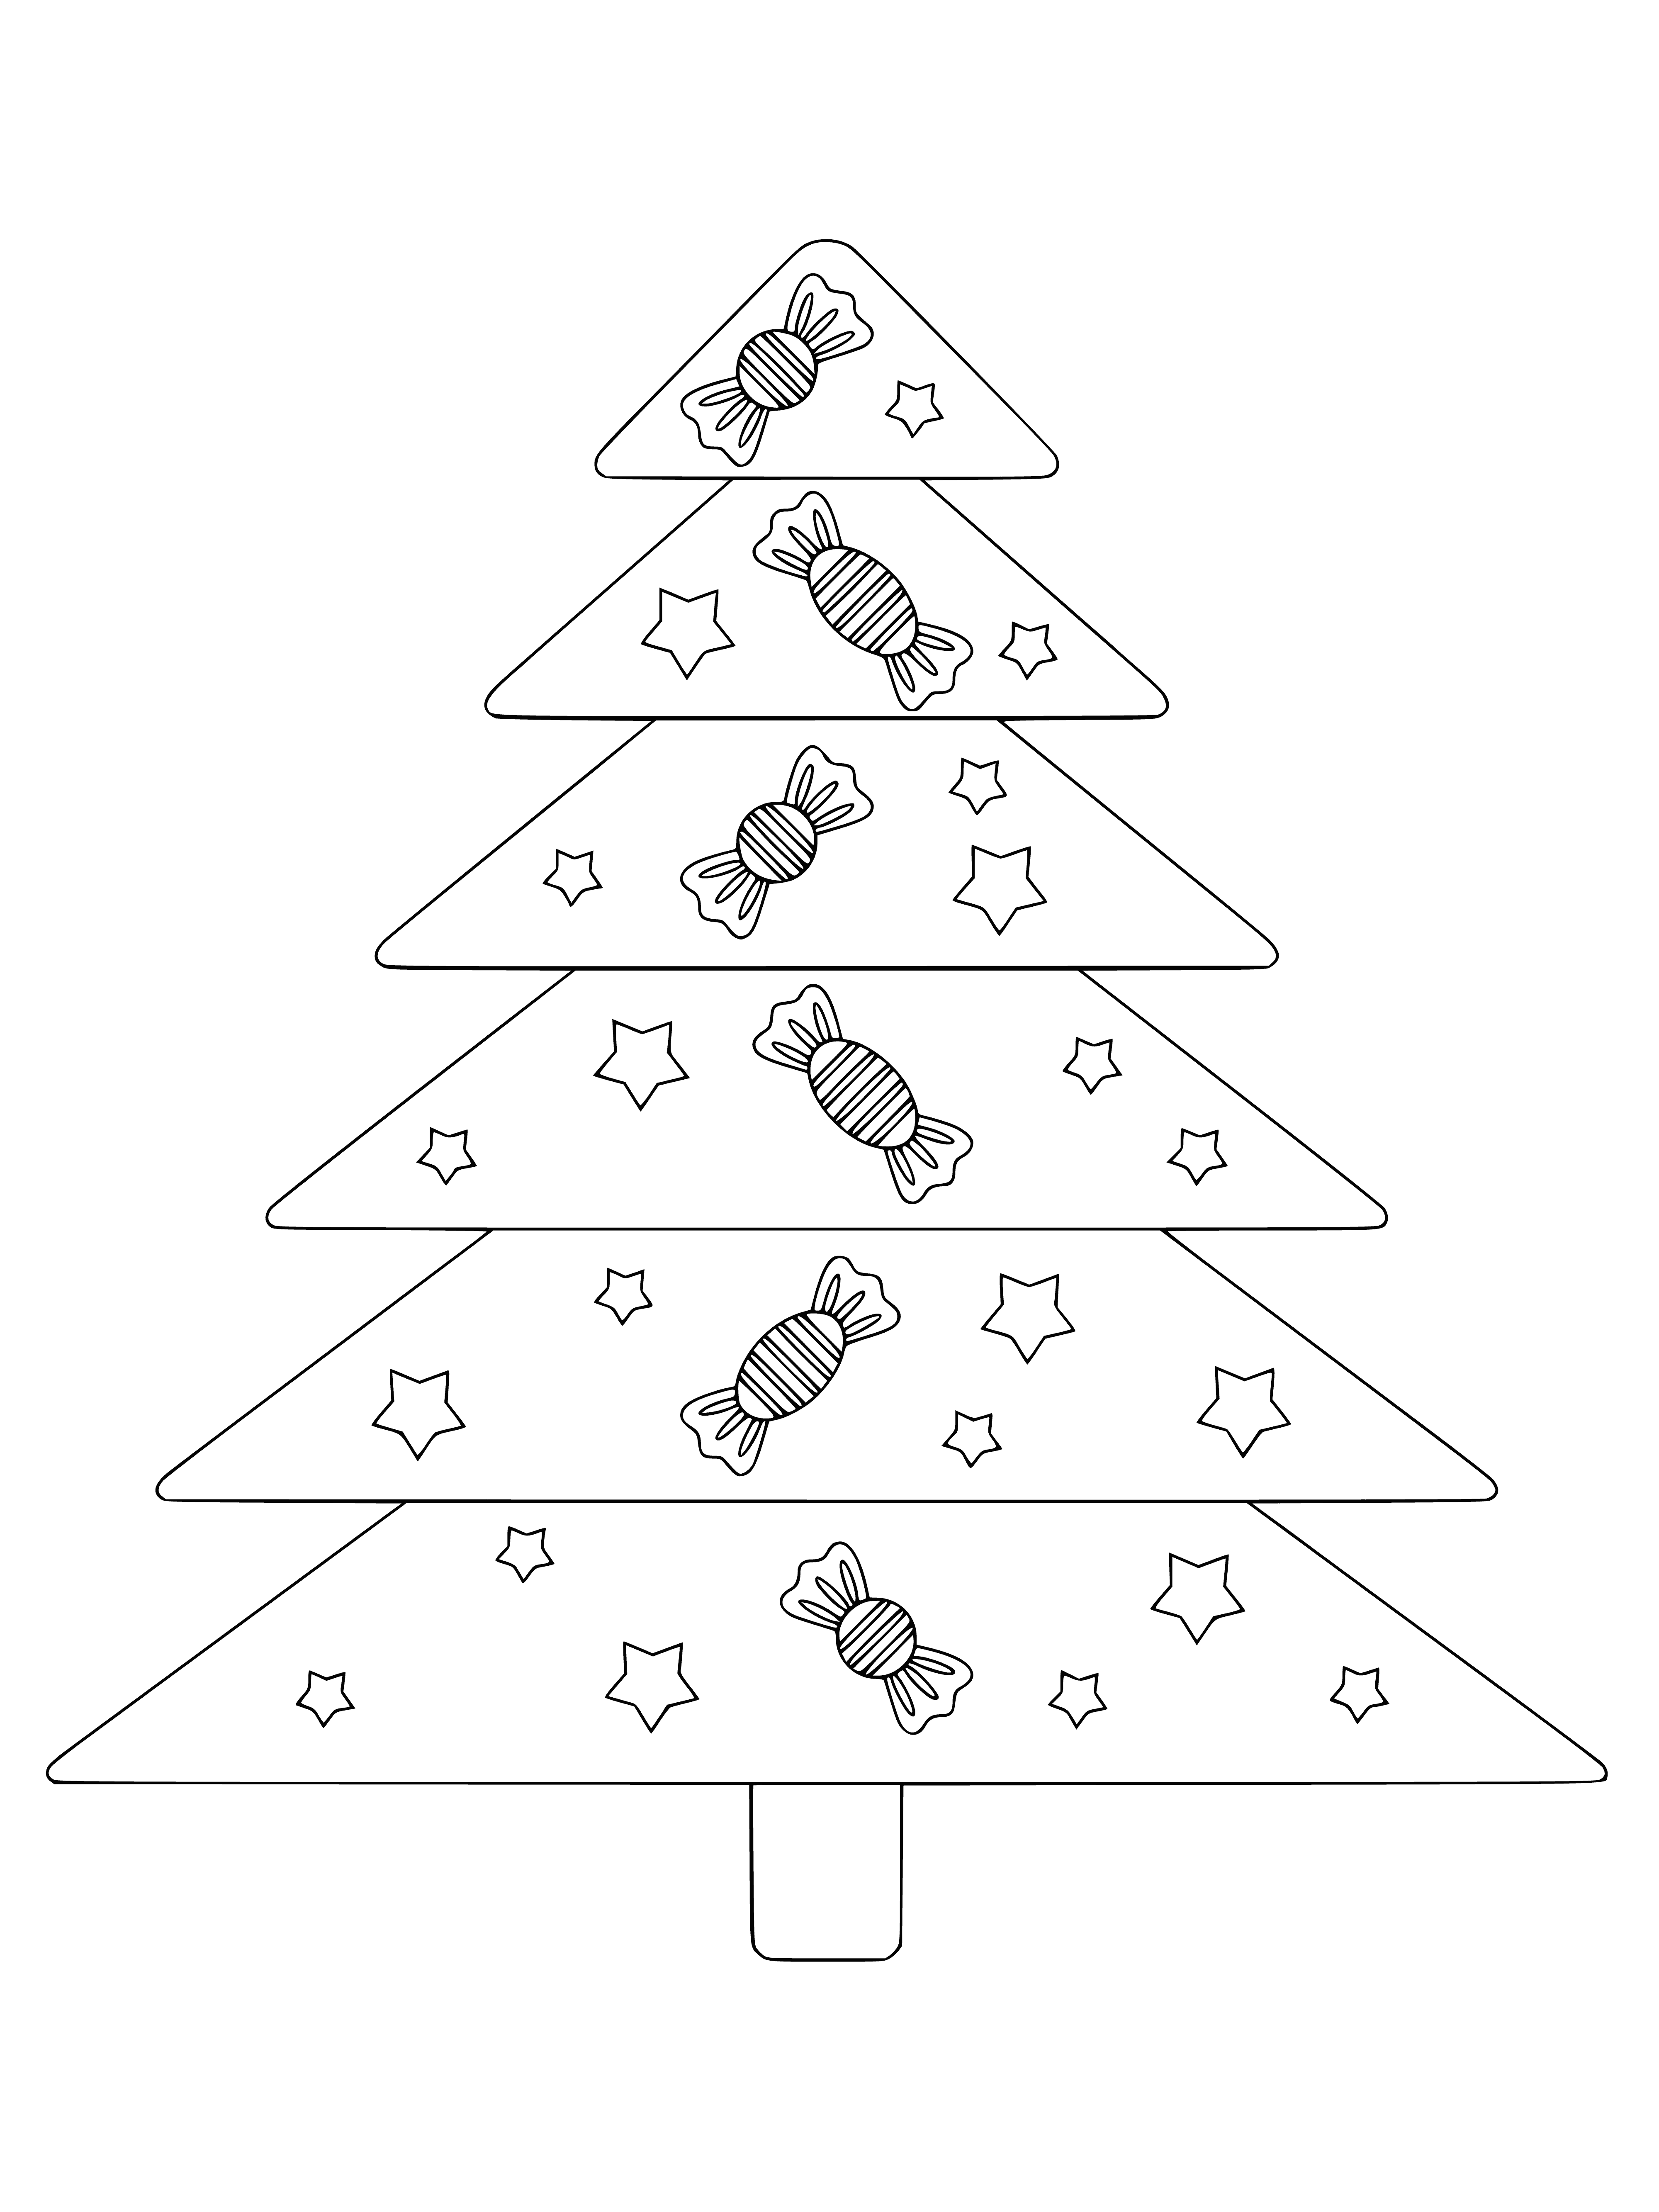 coloring page: Christmas tree ornamentation originated in 16th c. Germany, spread via upper classes to the rest of the world in the late 19th c. #ChristmasTree